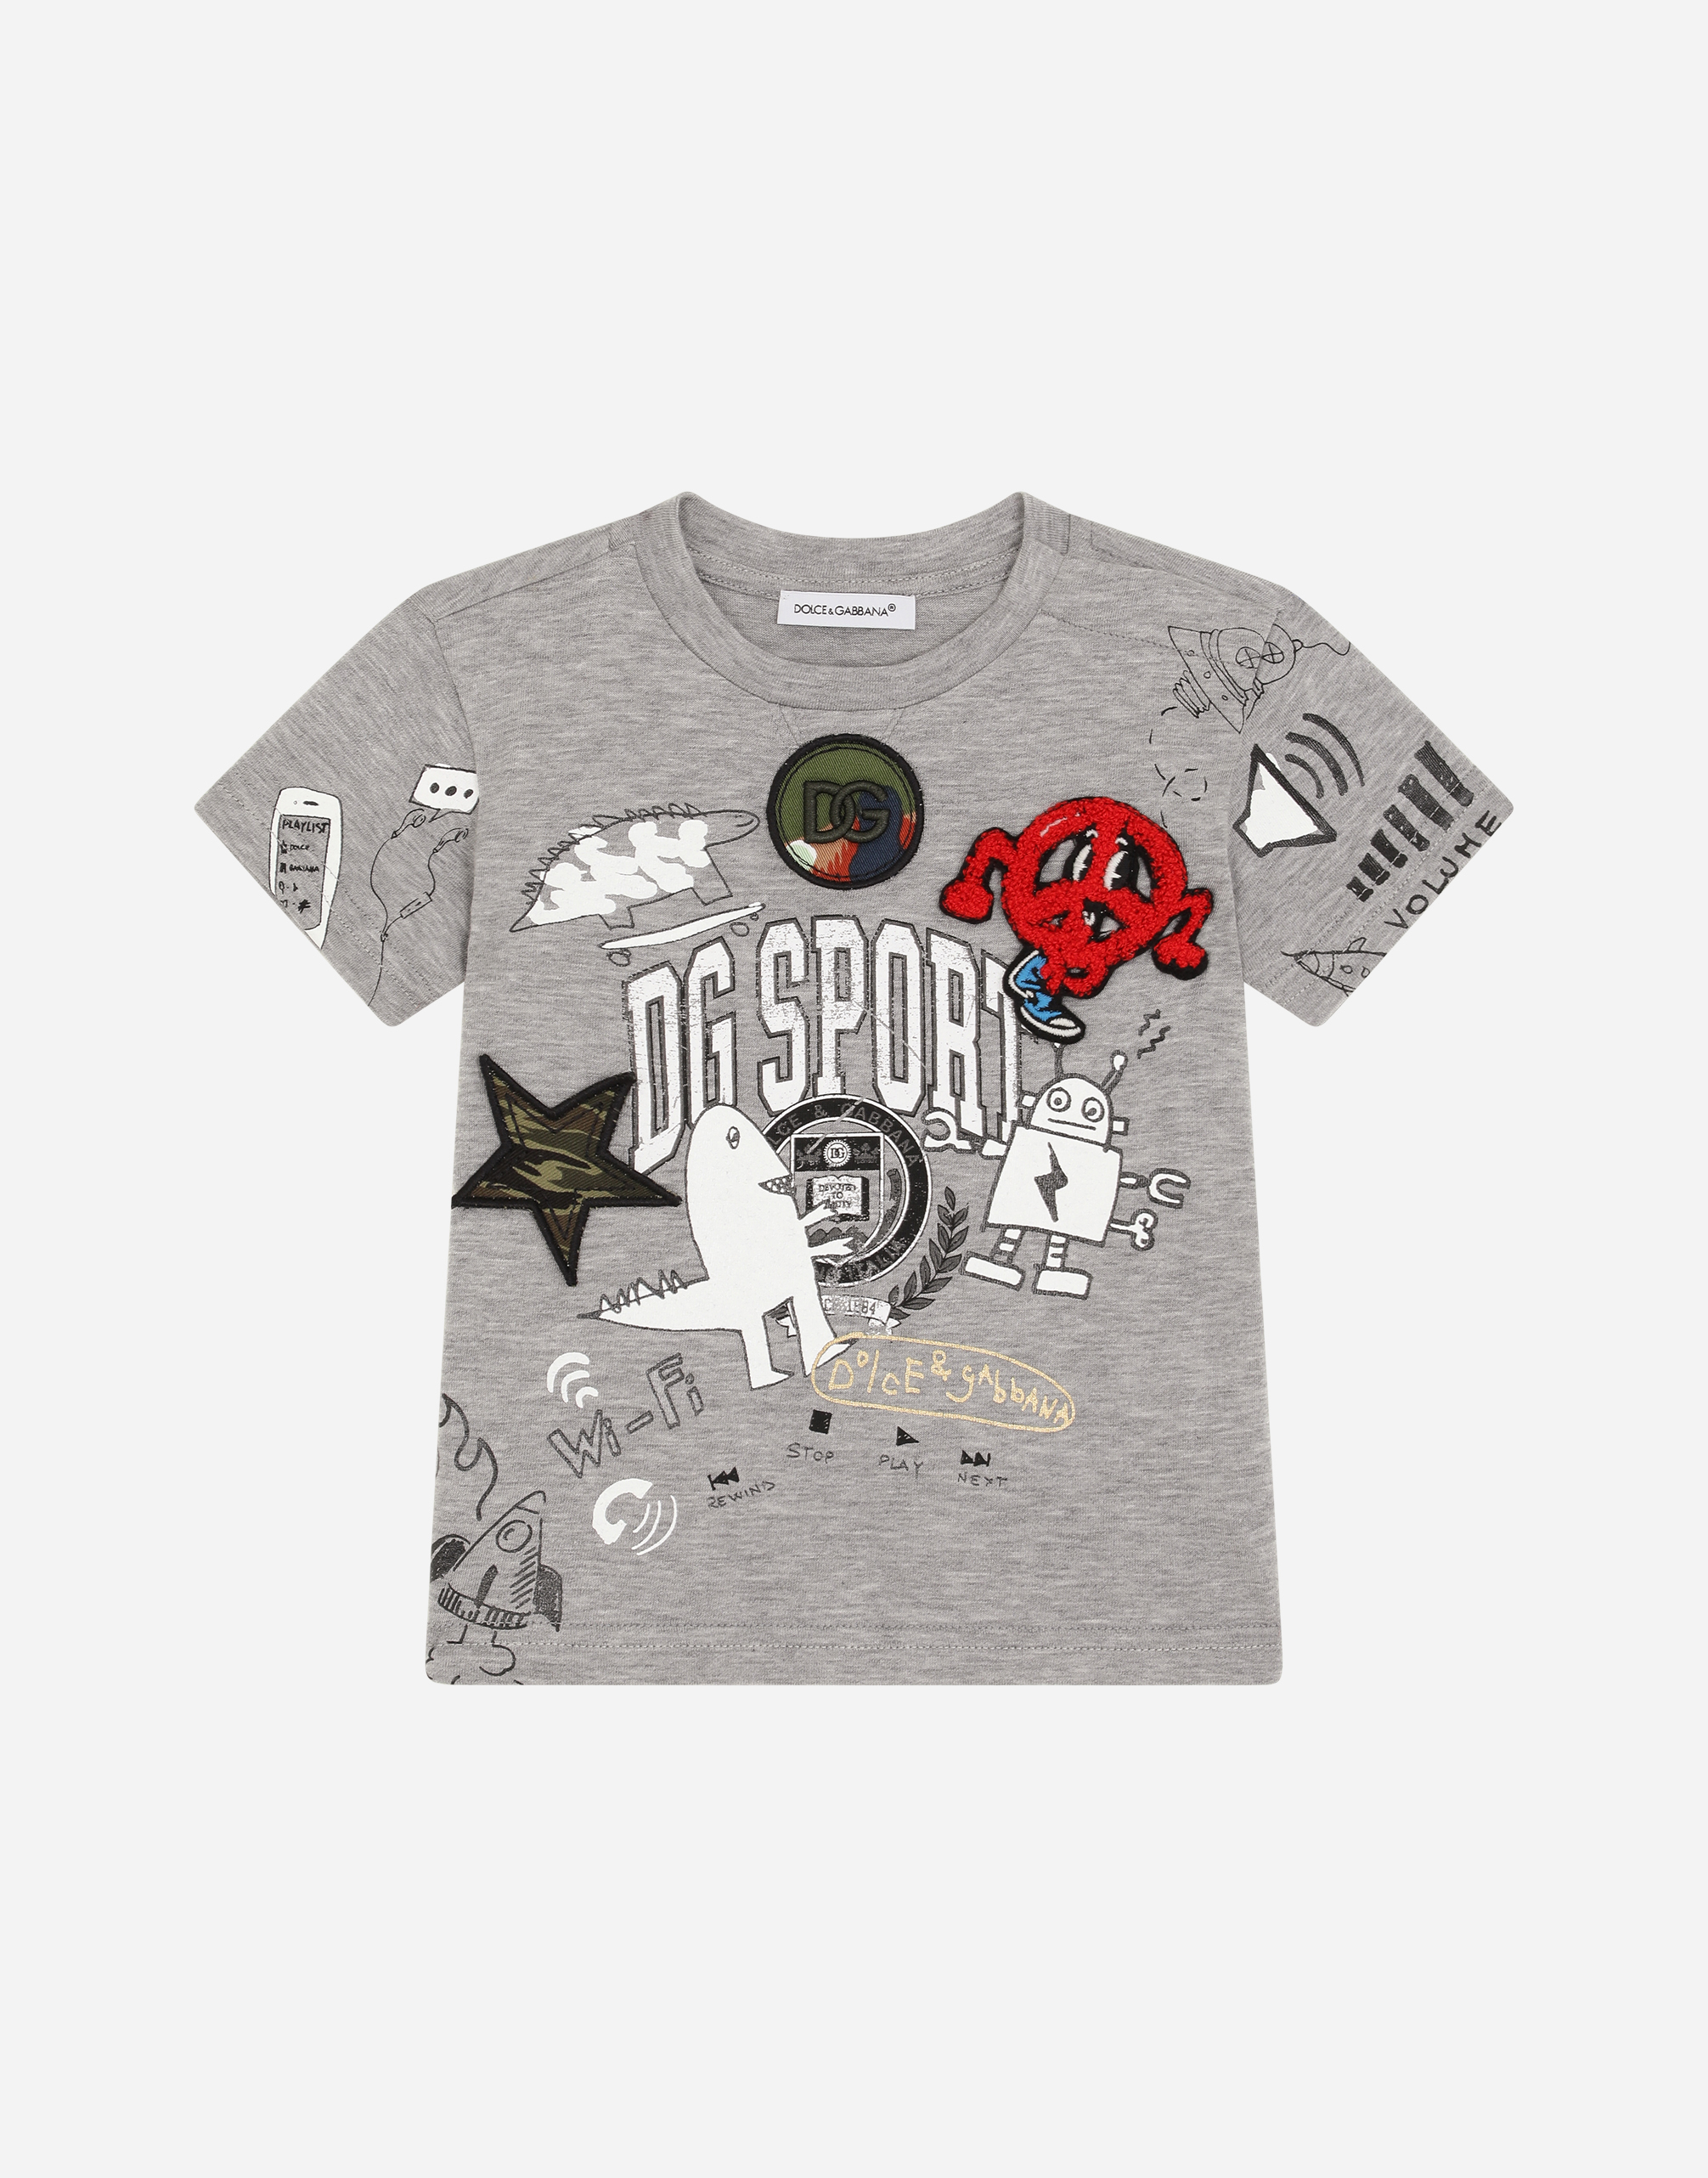 DOLCE & GABBANA JERSEY T-SHIRT WITH DG SPORT PRINT AND PATCH EMBELLISHMENT